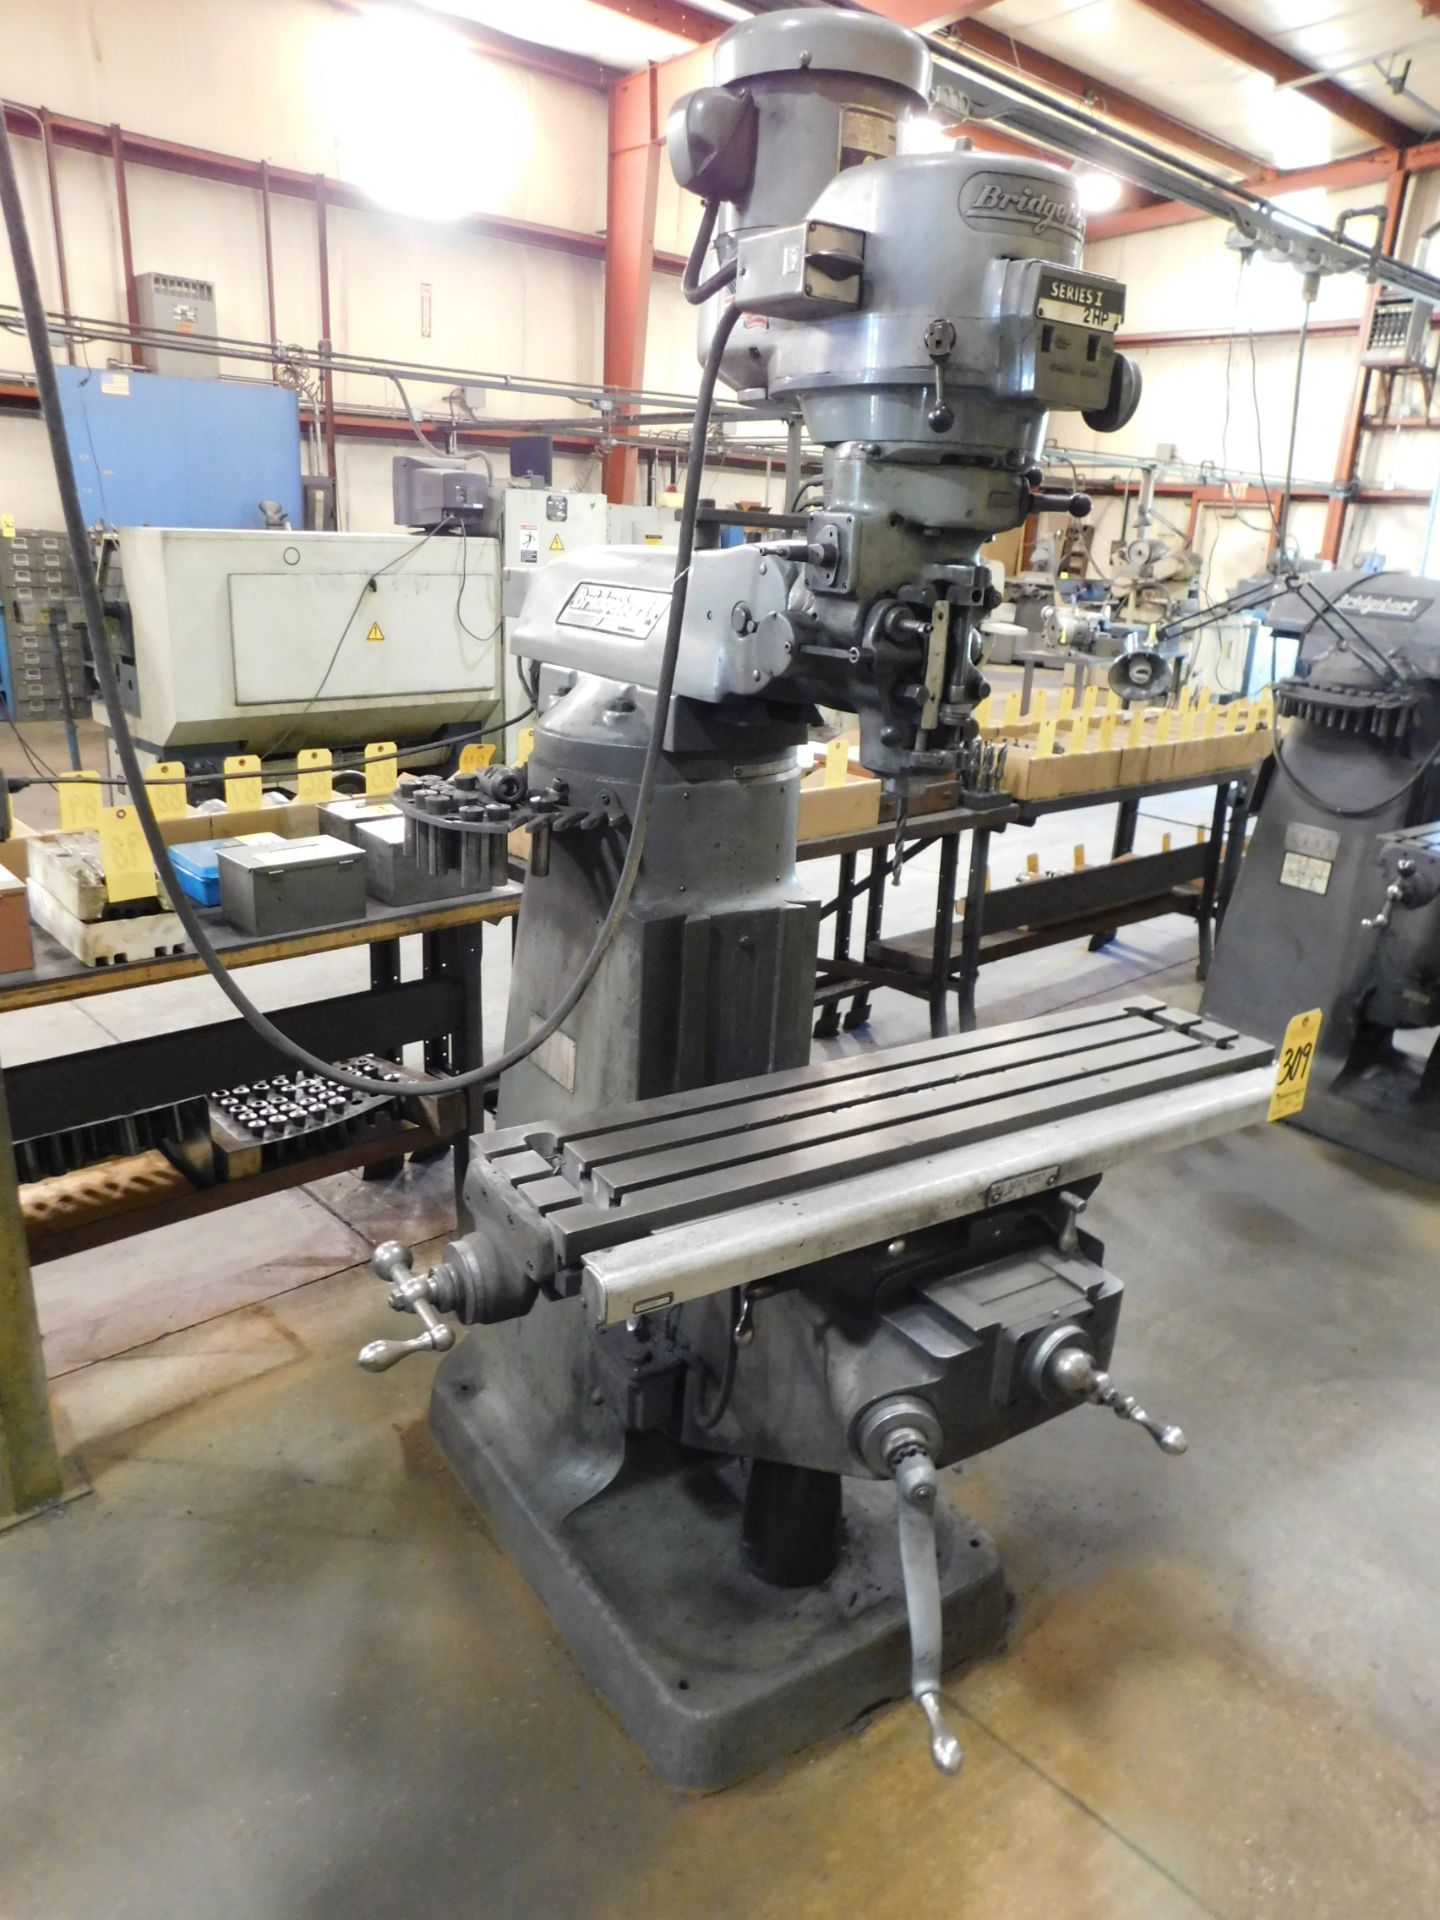 Bridgeport Series I, 2 HP Vertical Mill, s/n 12BR239284, 9” X 42” Table, Accurite D.R.O.